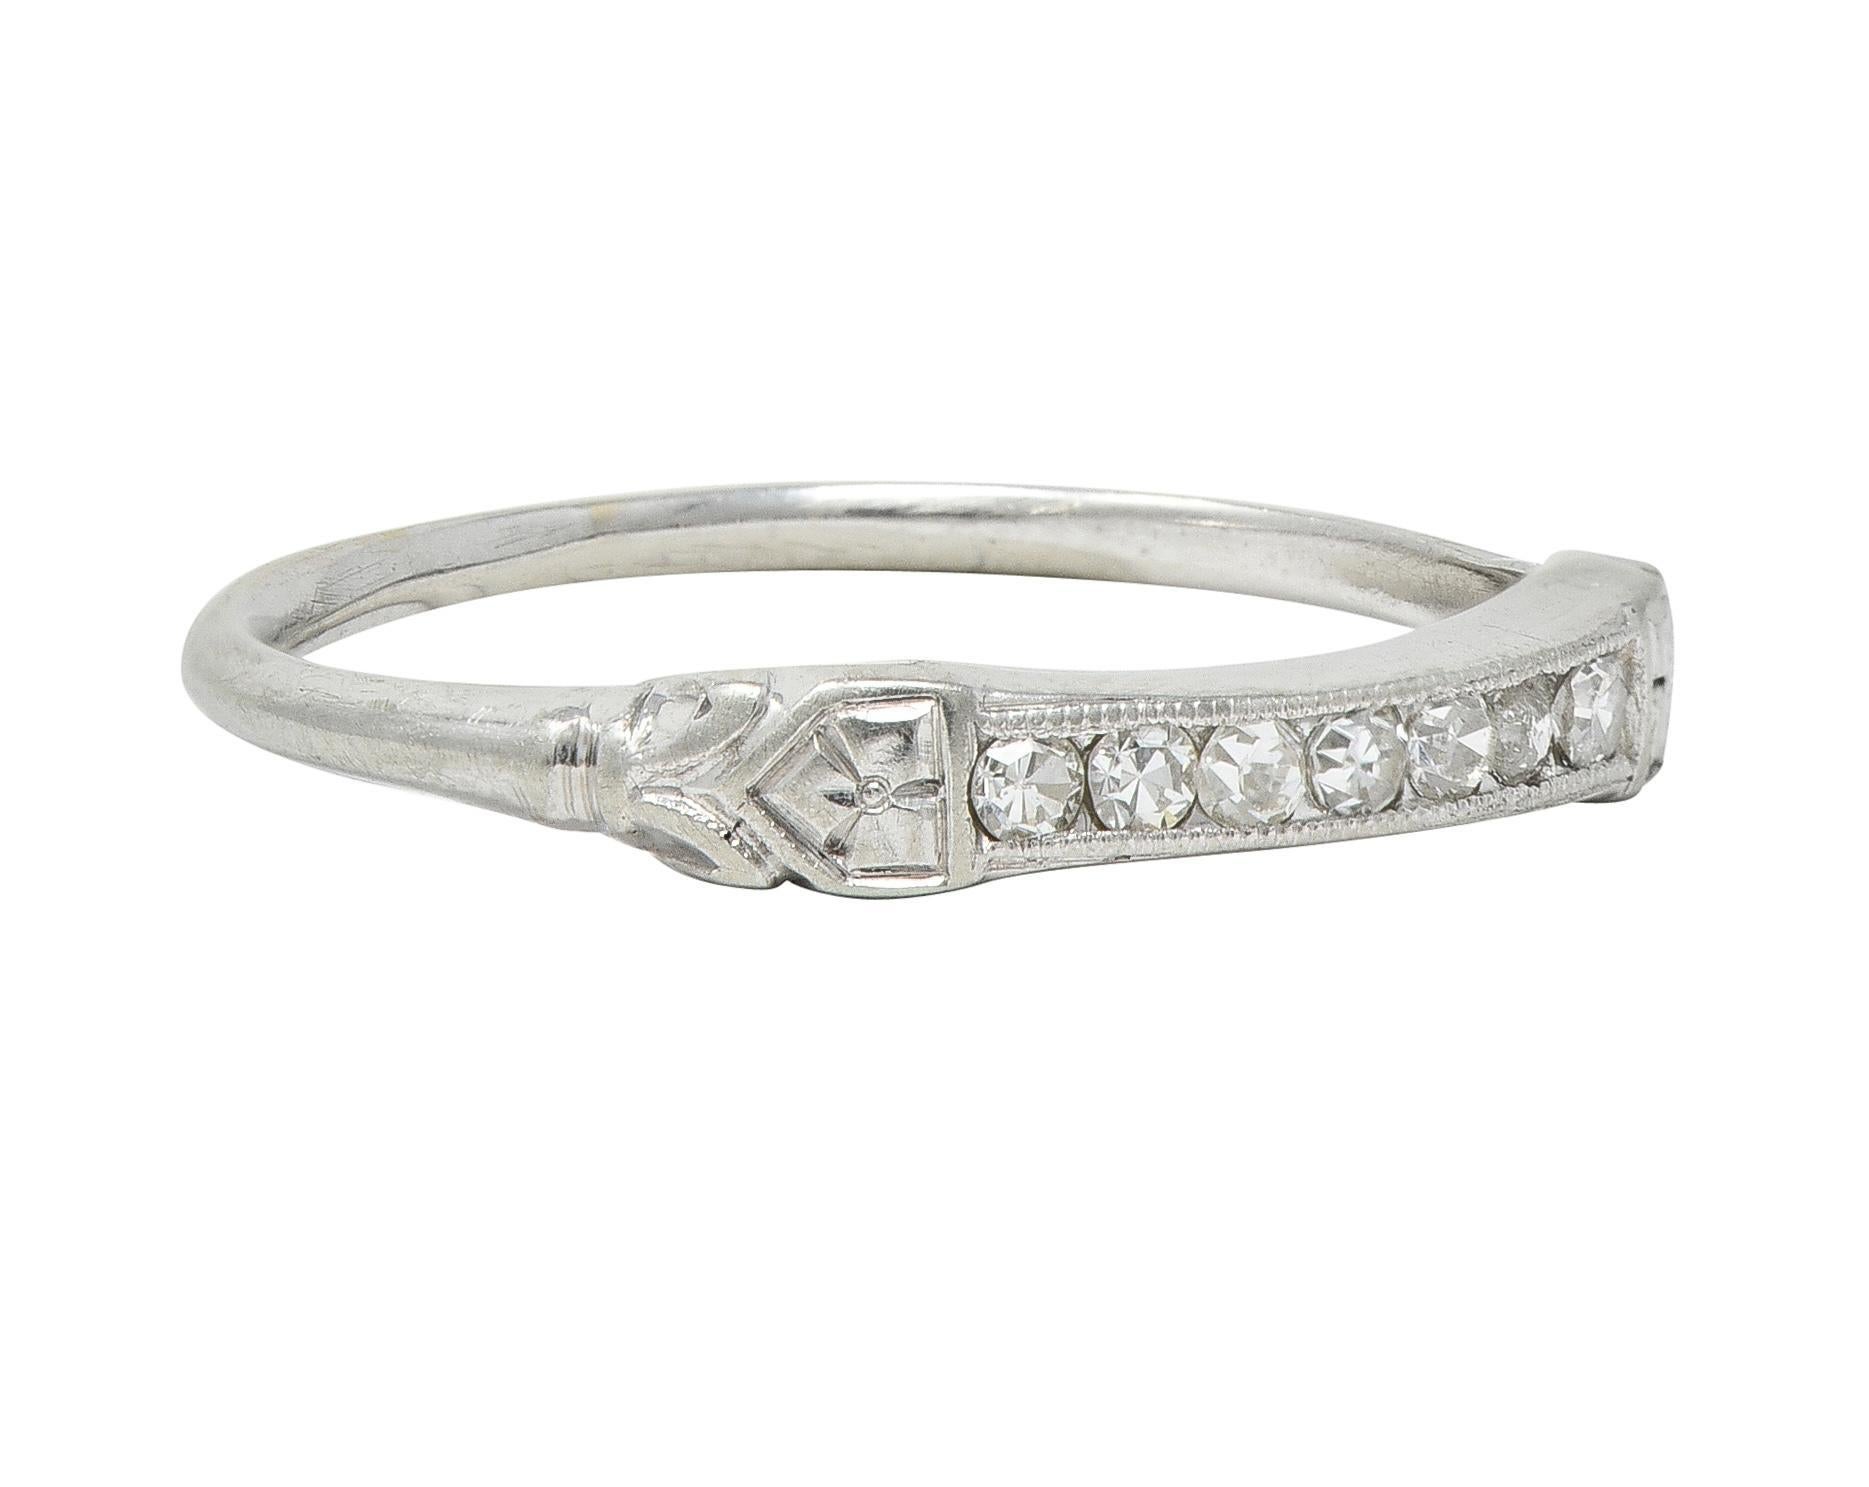 Featuring a row of single cut diamonds channel set east to west 
Weighing approximately 0.14 carat total - eye clean and bright 
Accented by milgrain edges and flanked by engraved shoulders
Depicting orange blossom and volute motifs
Stamped for 18